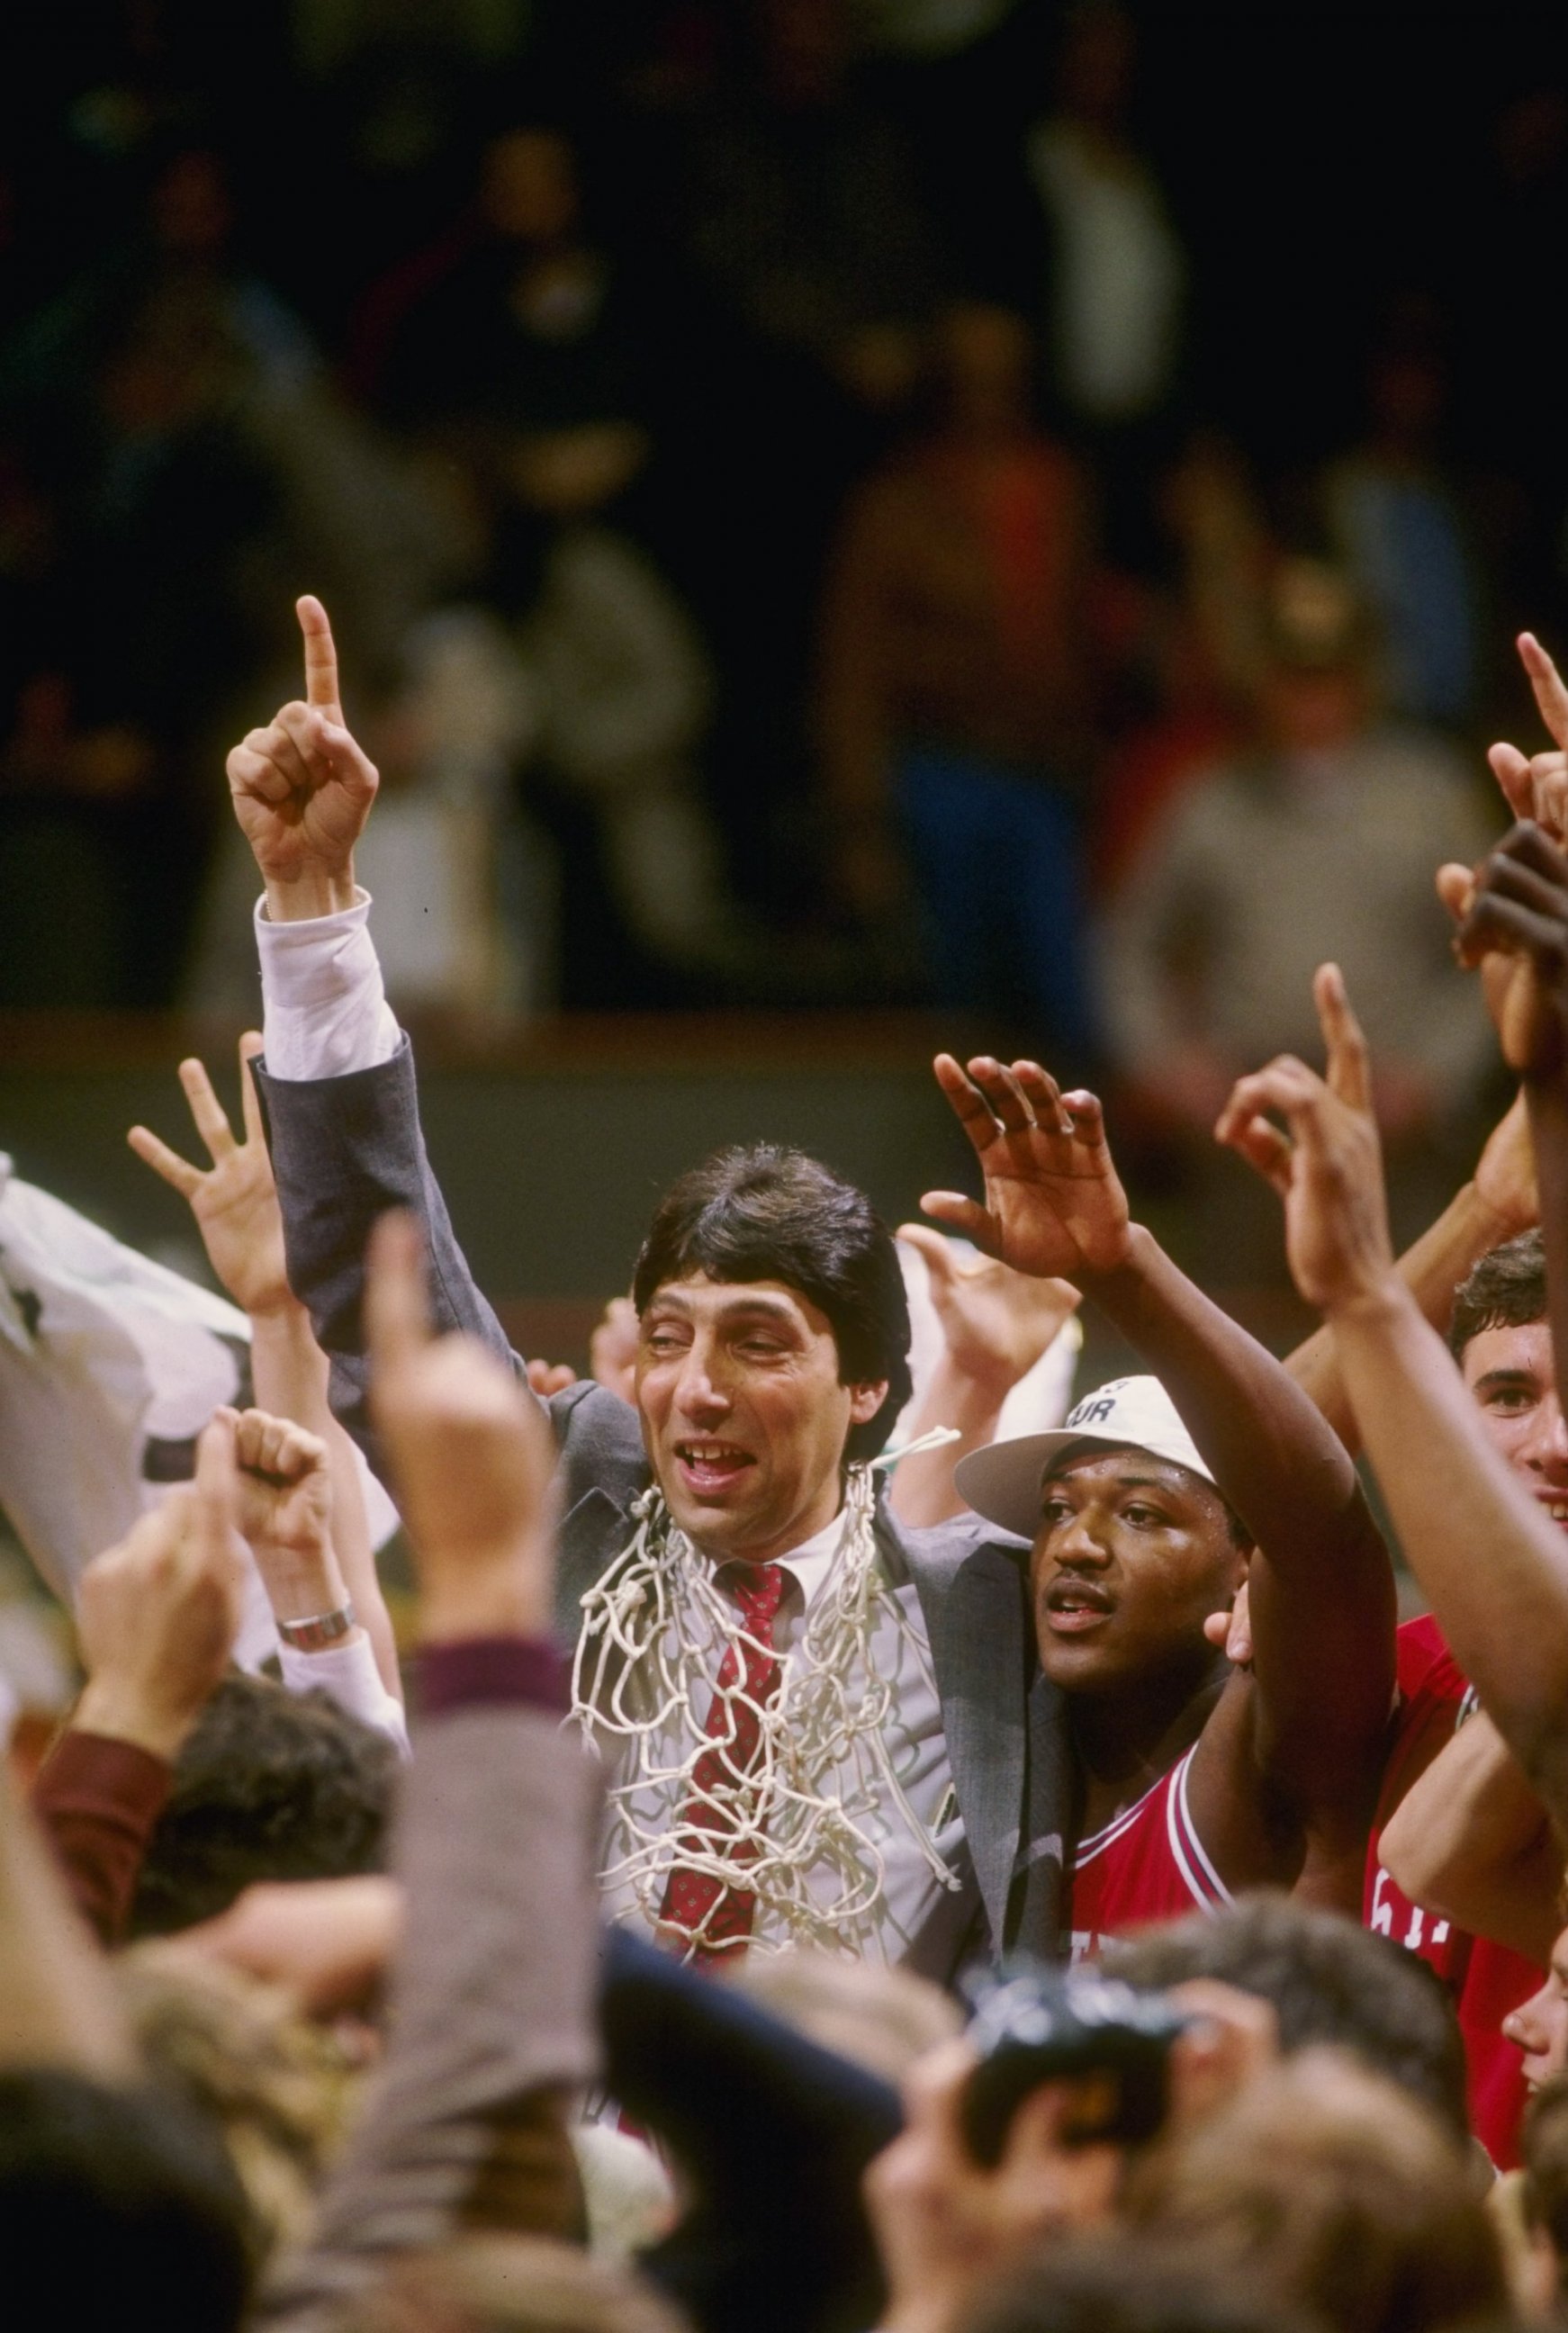 PHOTO: Head coach Jim Valvano of the North Carolina State Wolfpack celebrates with his team after the Wolfpack defeated the Houston Cougars 54-52 in the NCAA men’s basketball championship game at University Arena in Albuquerque, New Mexico.